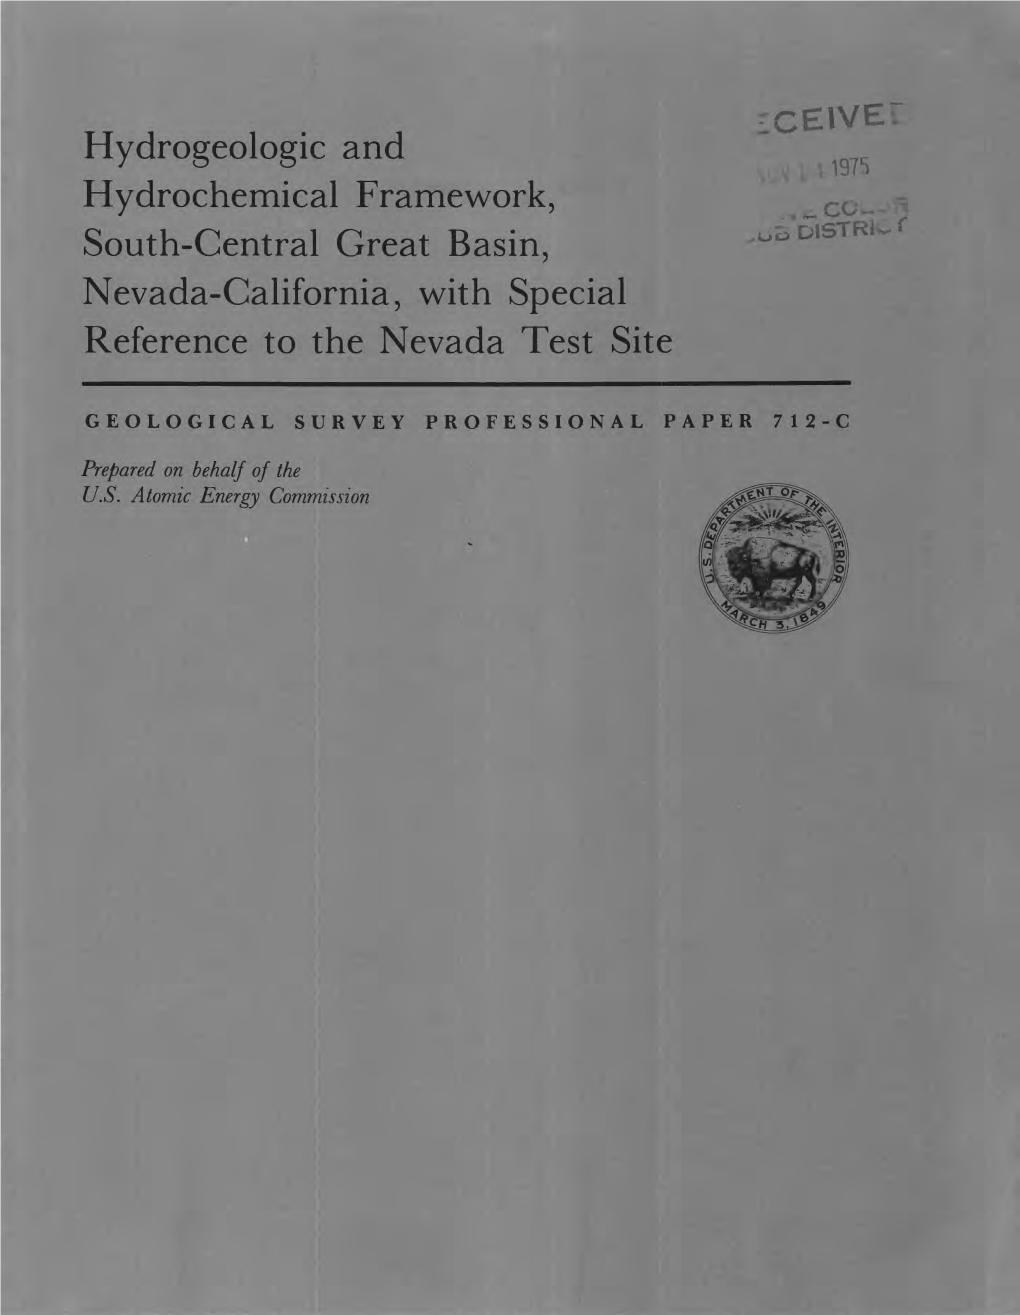 HYDROGEOLOGIC and HYDROCHEMICAL FRAMEWORK, SOUTH-CENTRAL GREAT BASIN, NEVADA-CALIFORNIA, with SPECIAL REFERENCE to the NEVADA TEST SITE Big Spring, Ash Meadows, Nev